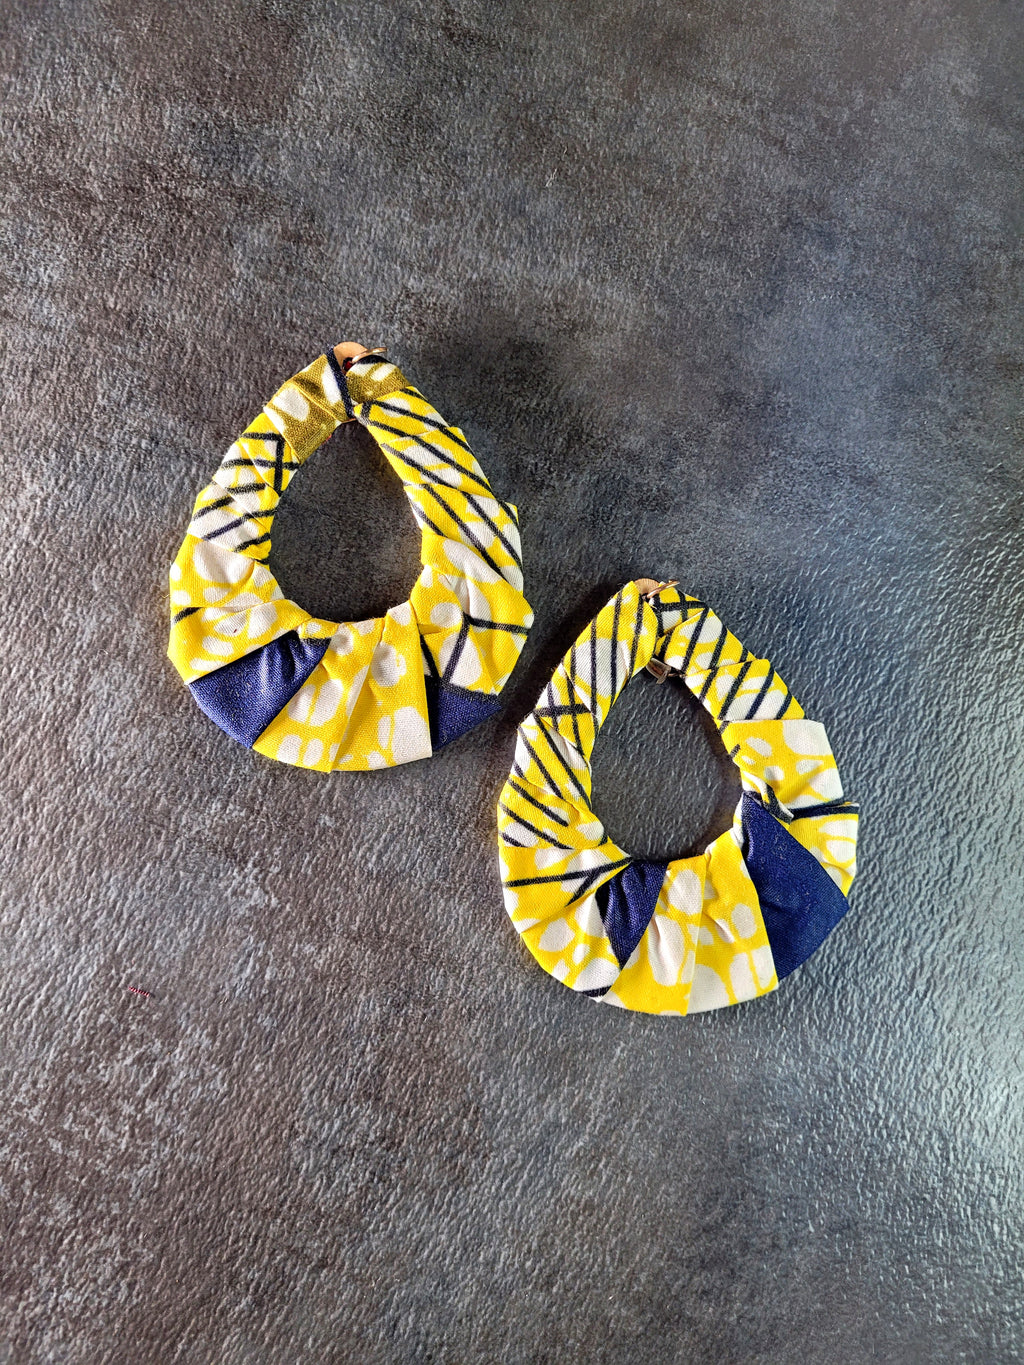 African Cloth Teardrop Earrings - Blue, Yellow, White, Red